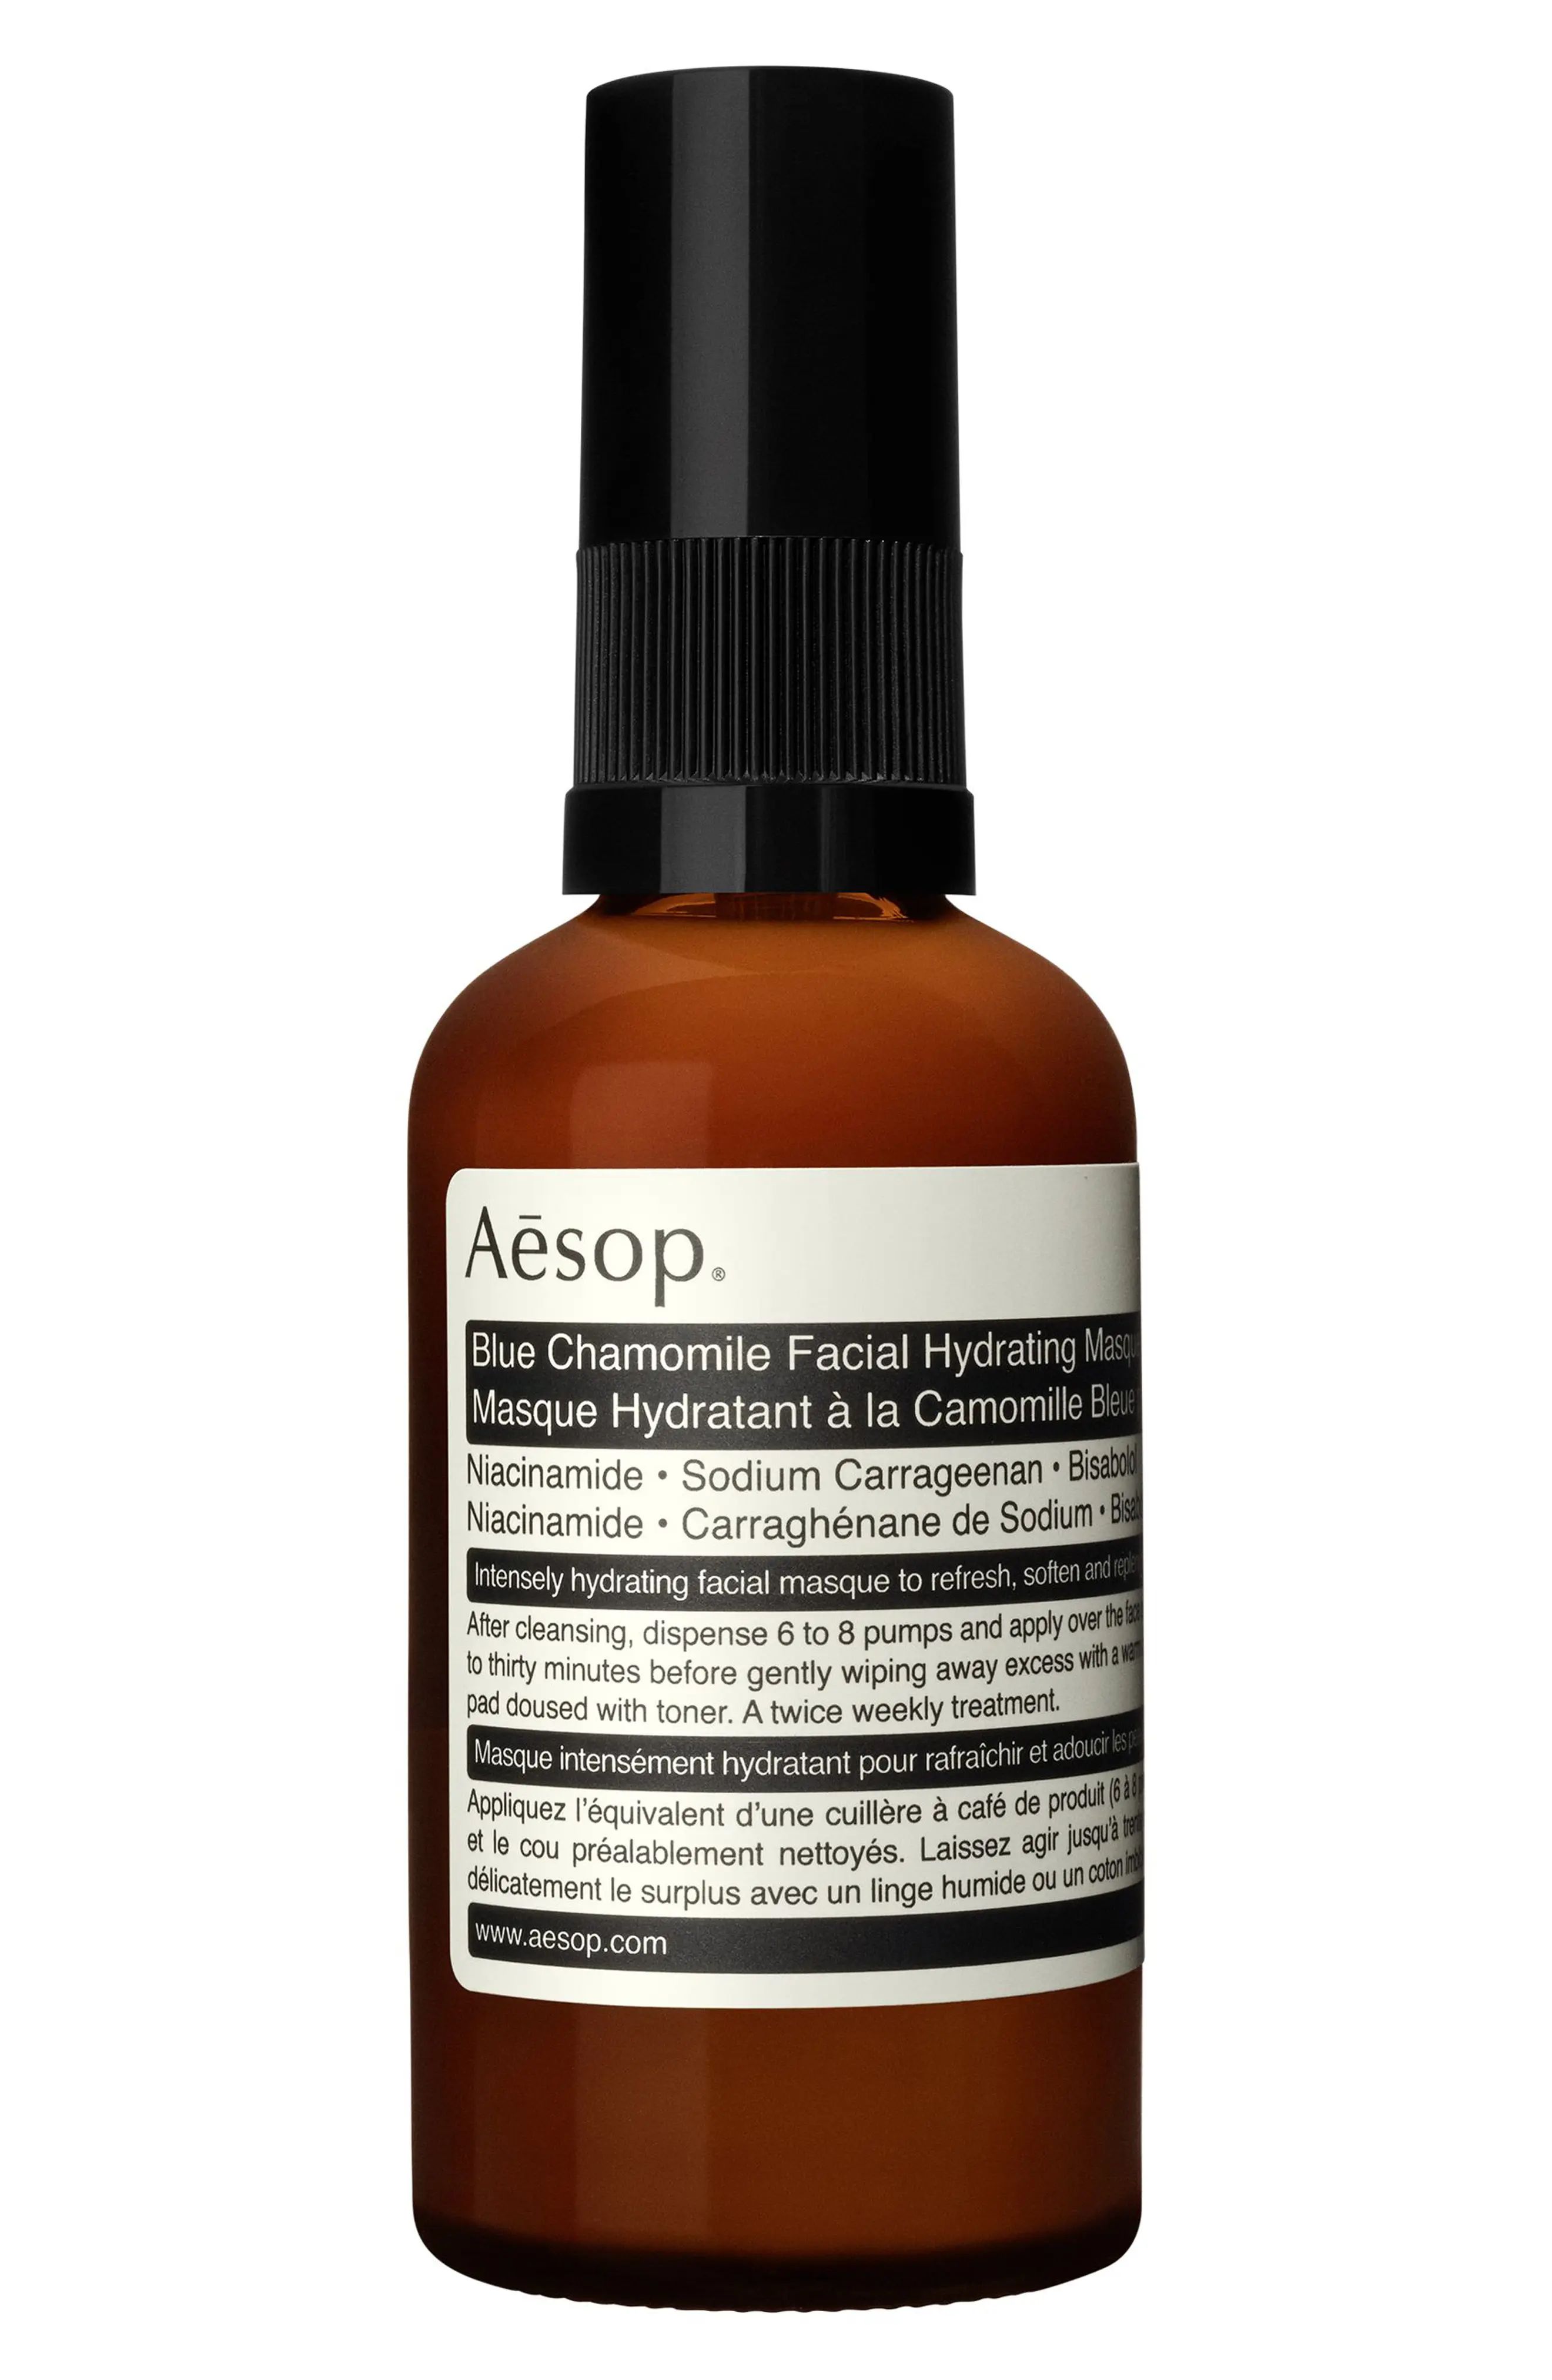 Aesop Blue Chamomile Facial Hydrating Masque | Nordstrom